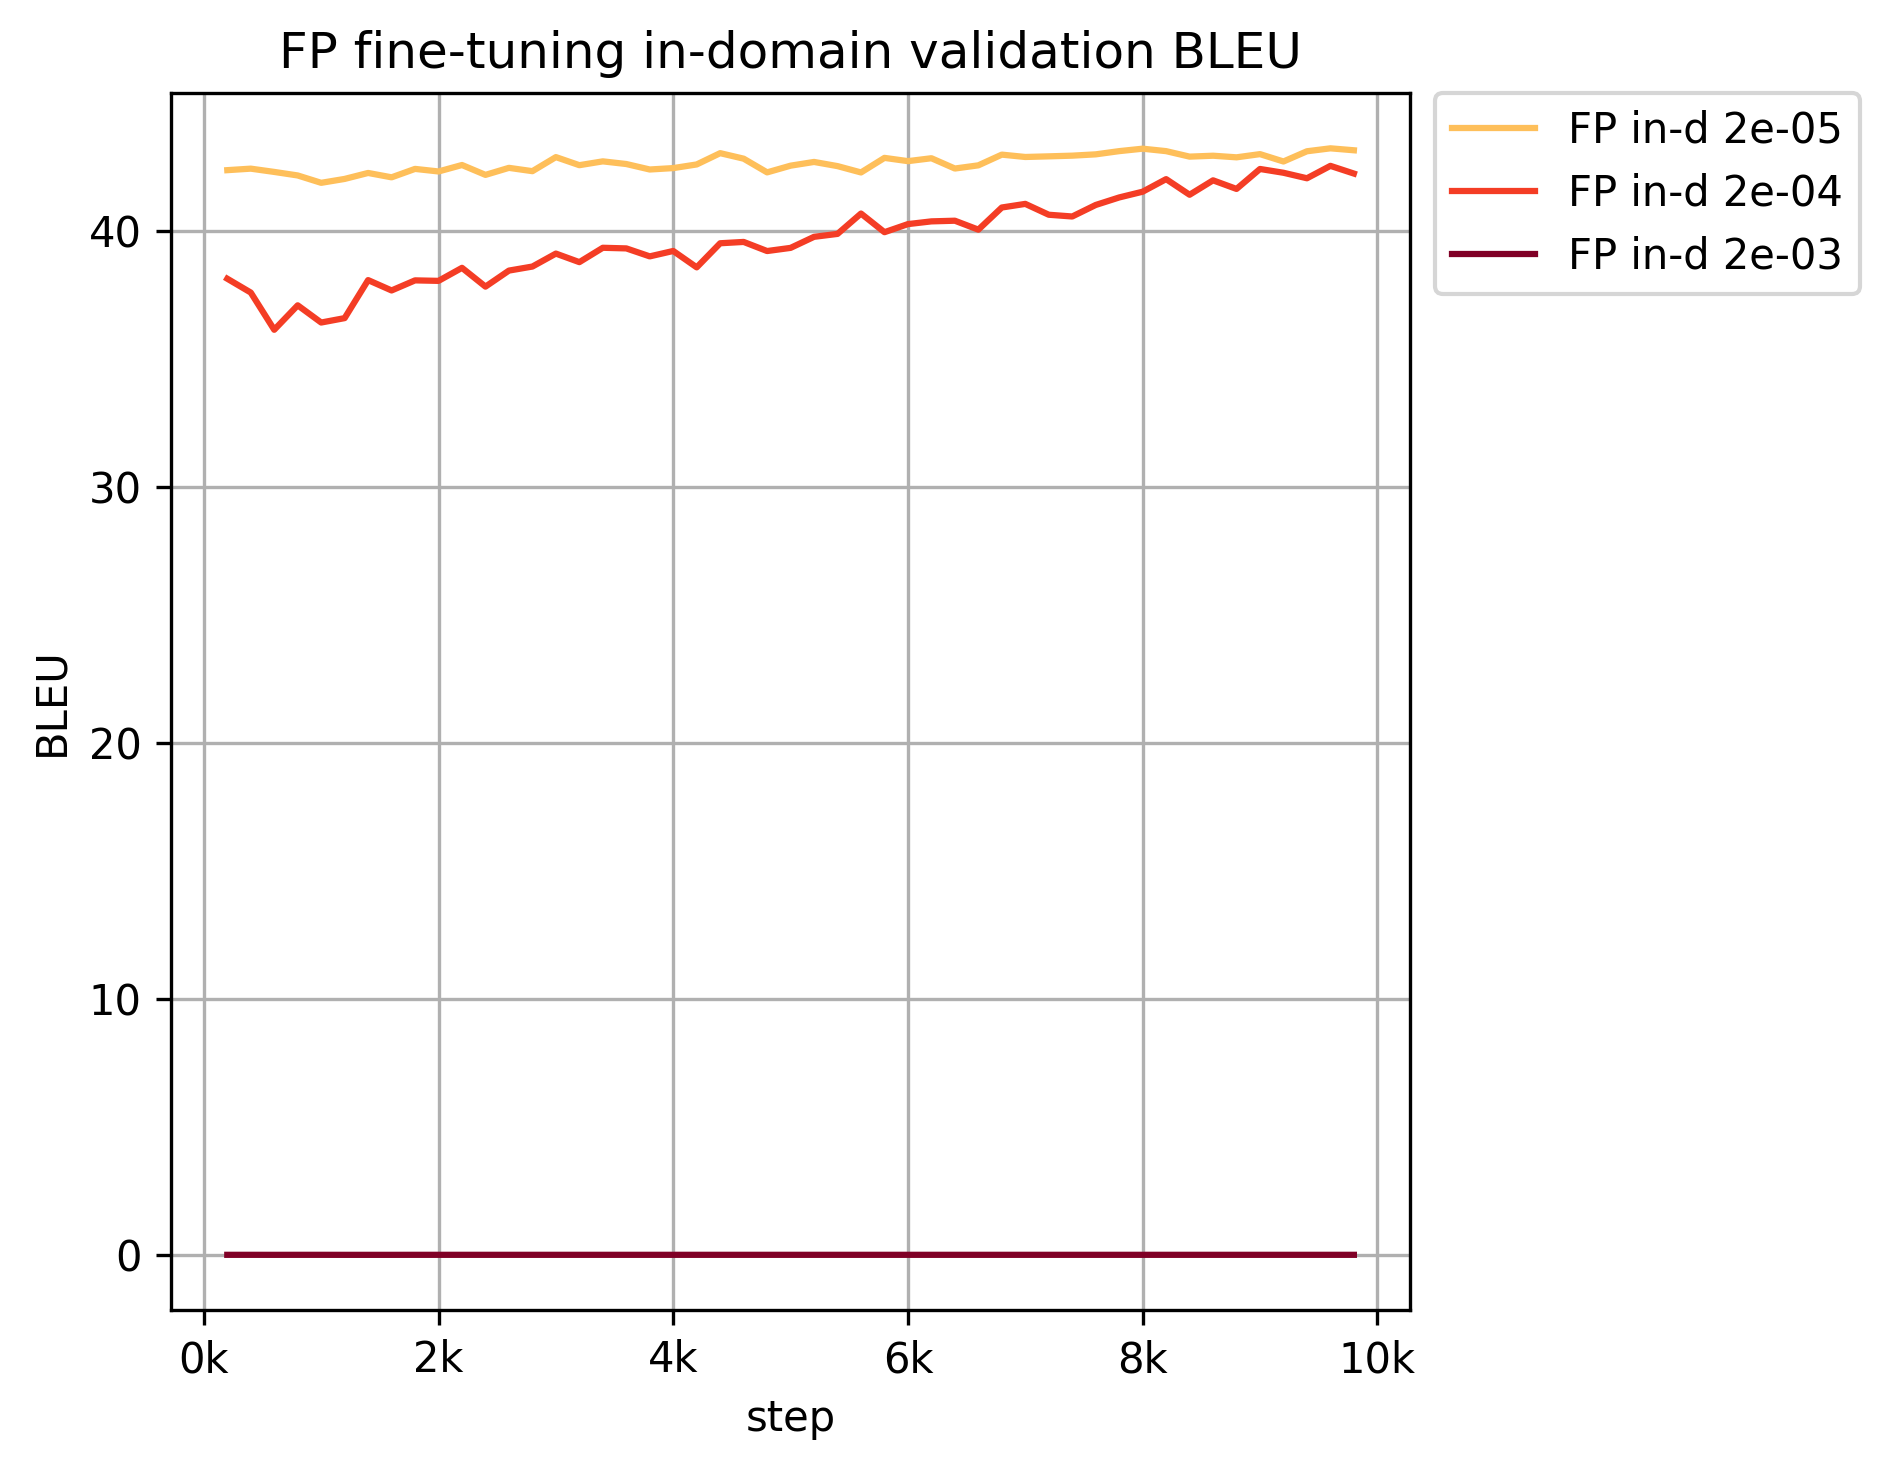 Search for learning rate and number of epochs for FP. The best learning rate for FP fine-tuning is 0.00002.